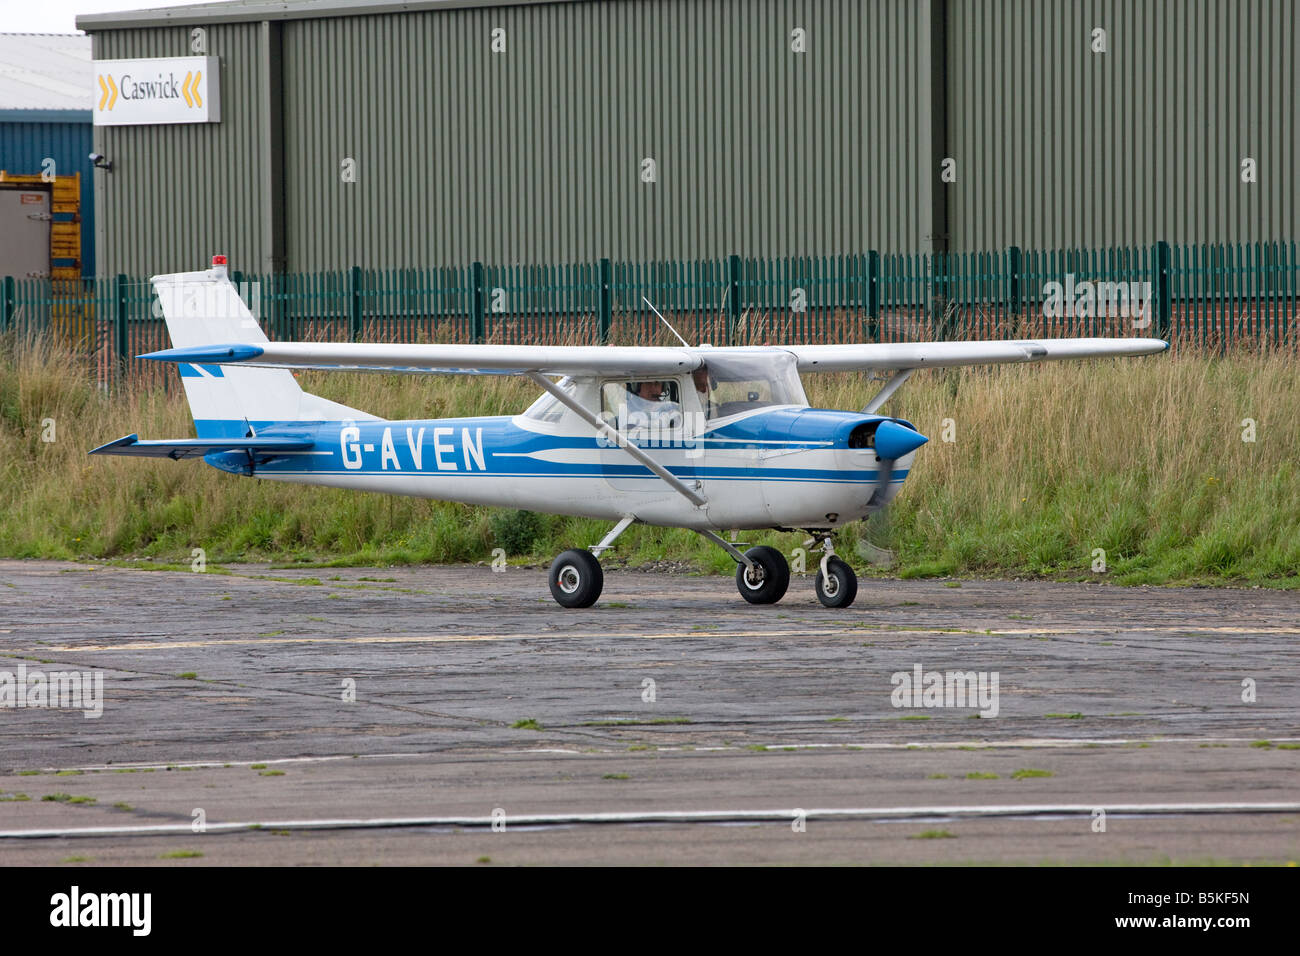 Reims Cessna 150G G-AVEN taxiing to end of runway ready to take-off from Sandtoft Airfield Stock Photo